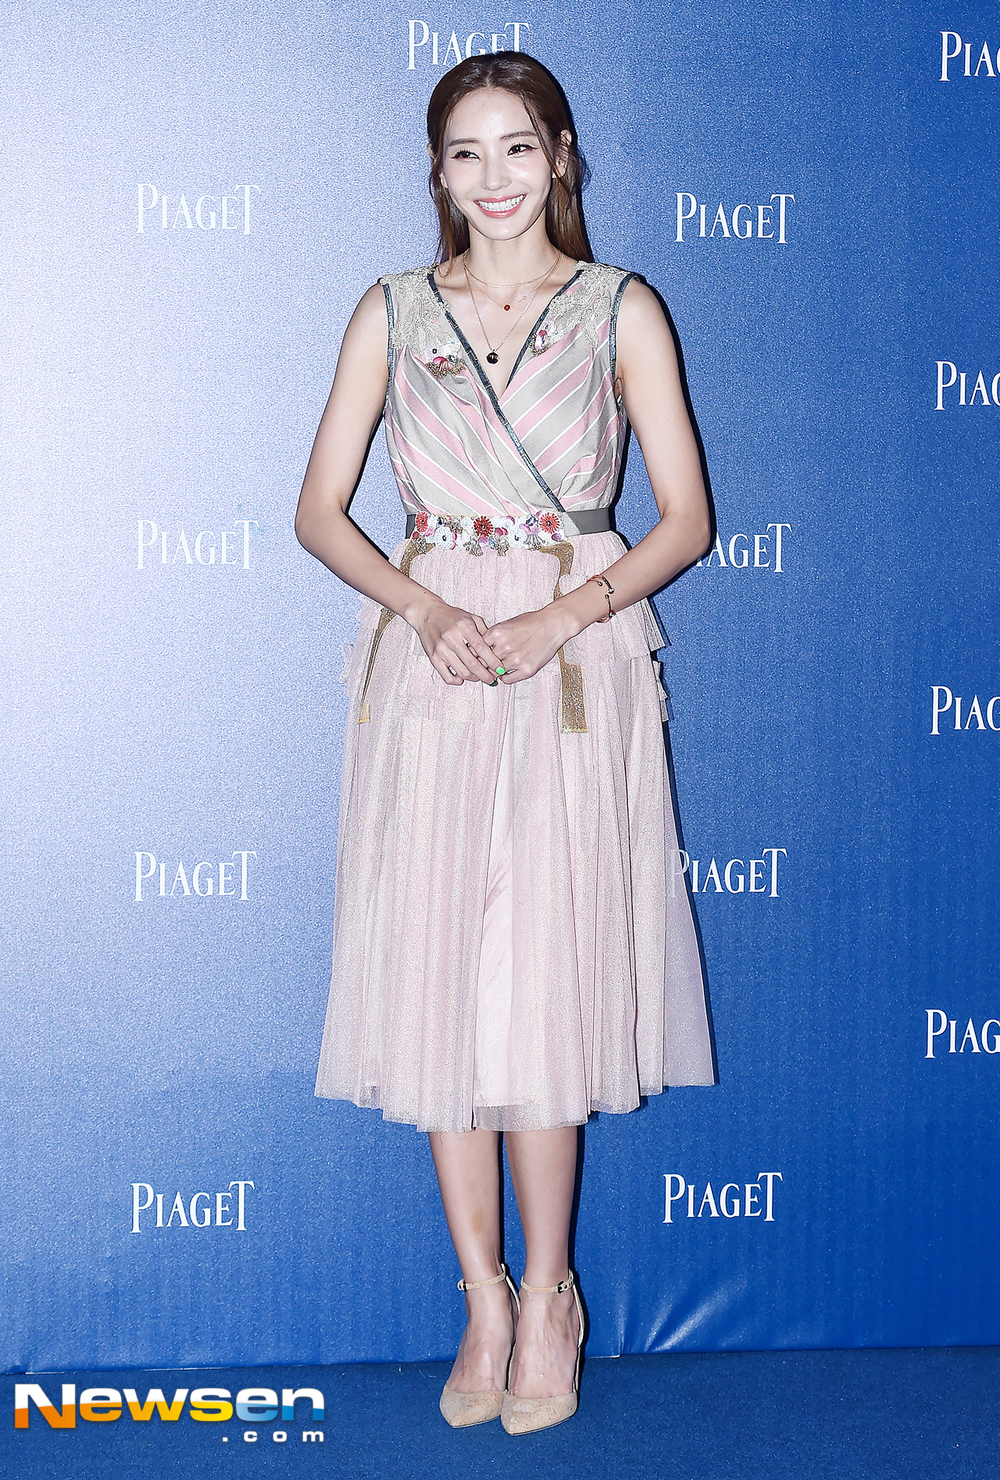 The Piaget photo event was held at K Contemporary Art Museum in Sinsa-dong, Gangnam-gu, Seoul on the afternoon of May 10.Han Chae-young poses on the day.kim hye-jin